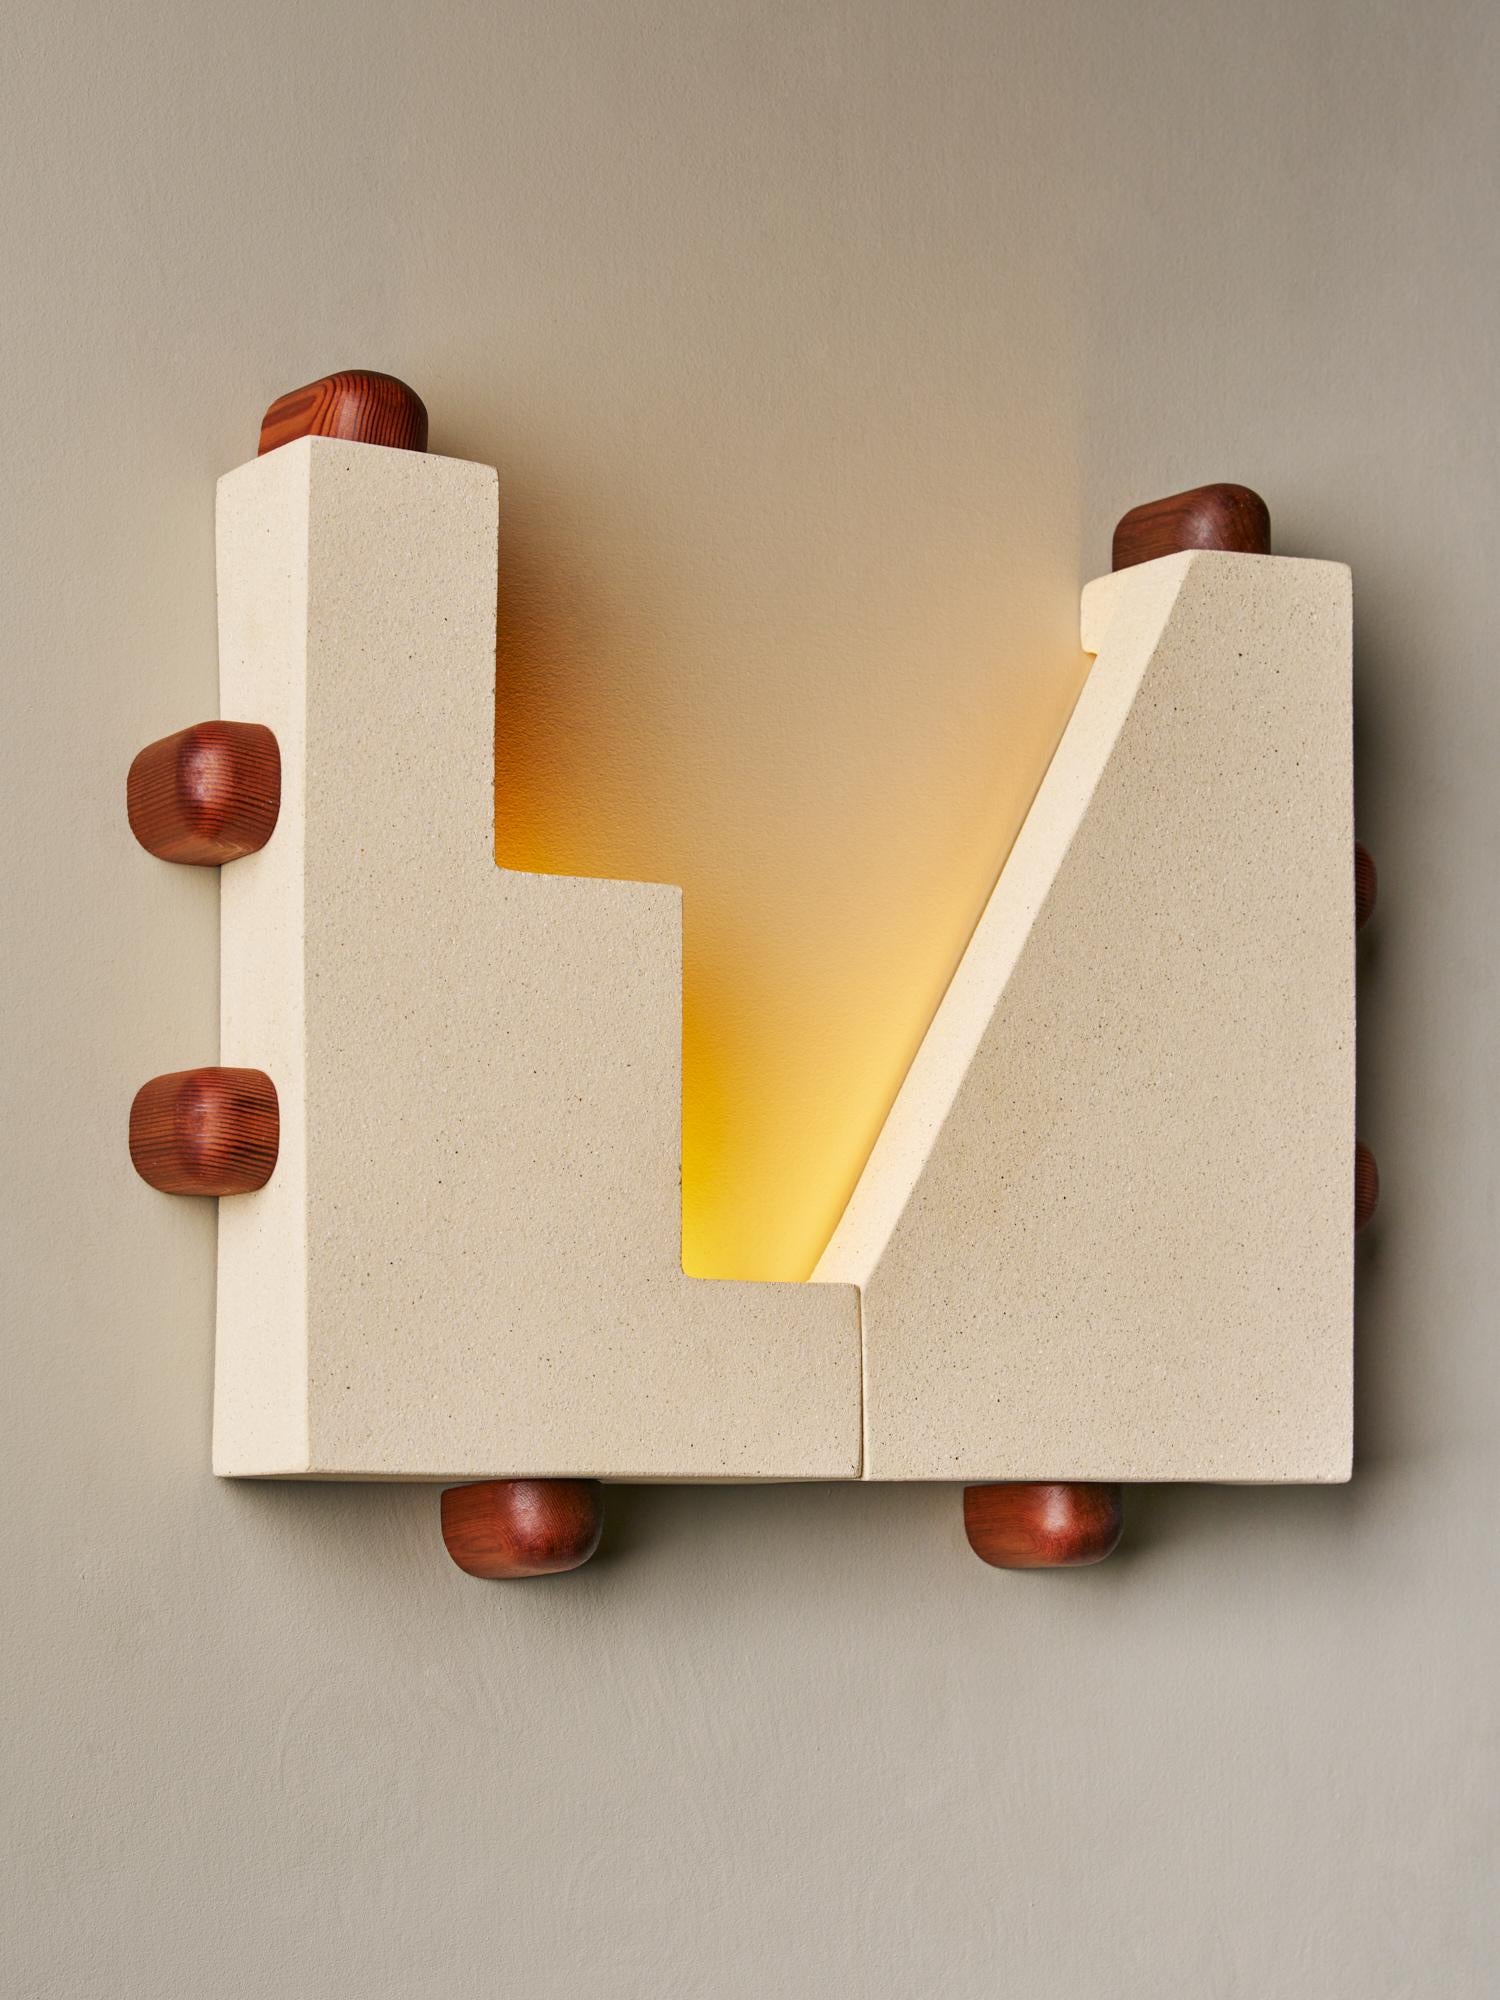 Inspired by dynamic landscapes and rudimentary materials and techniques, Piscina’s Sierra Sconces have the unique ability to produce endless variations while maintaining flawless continuity within a given environment. The handmade ceramic face